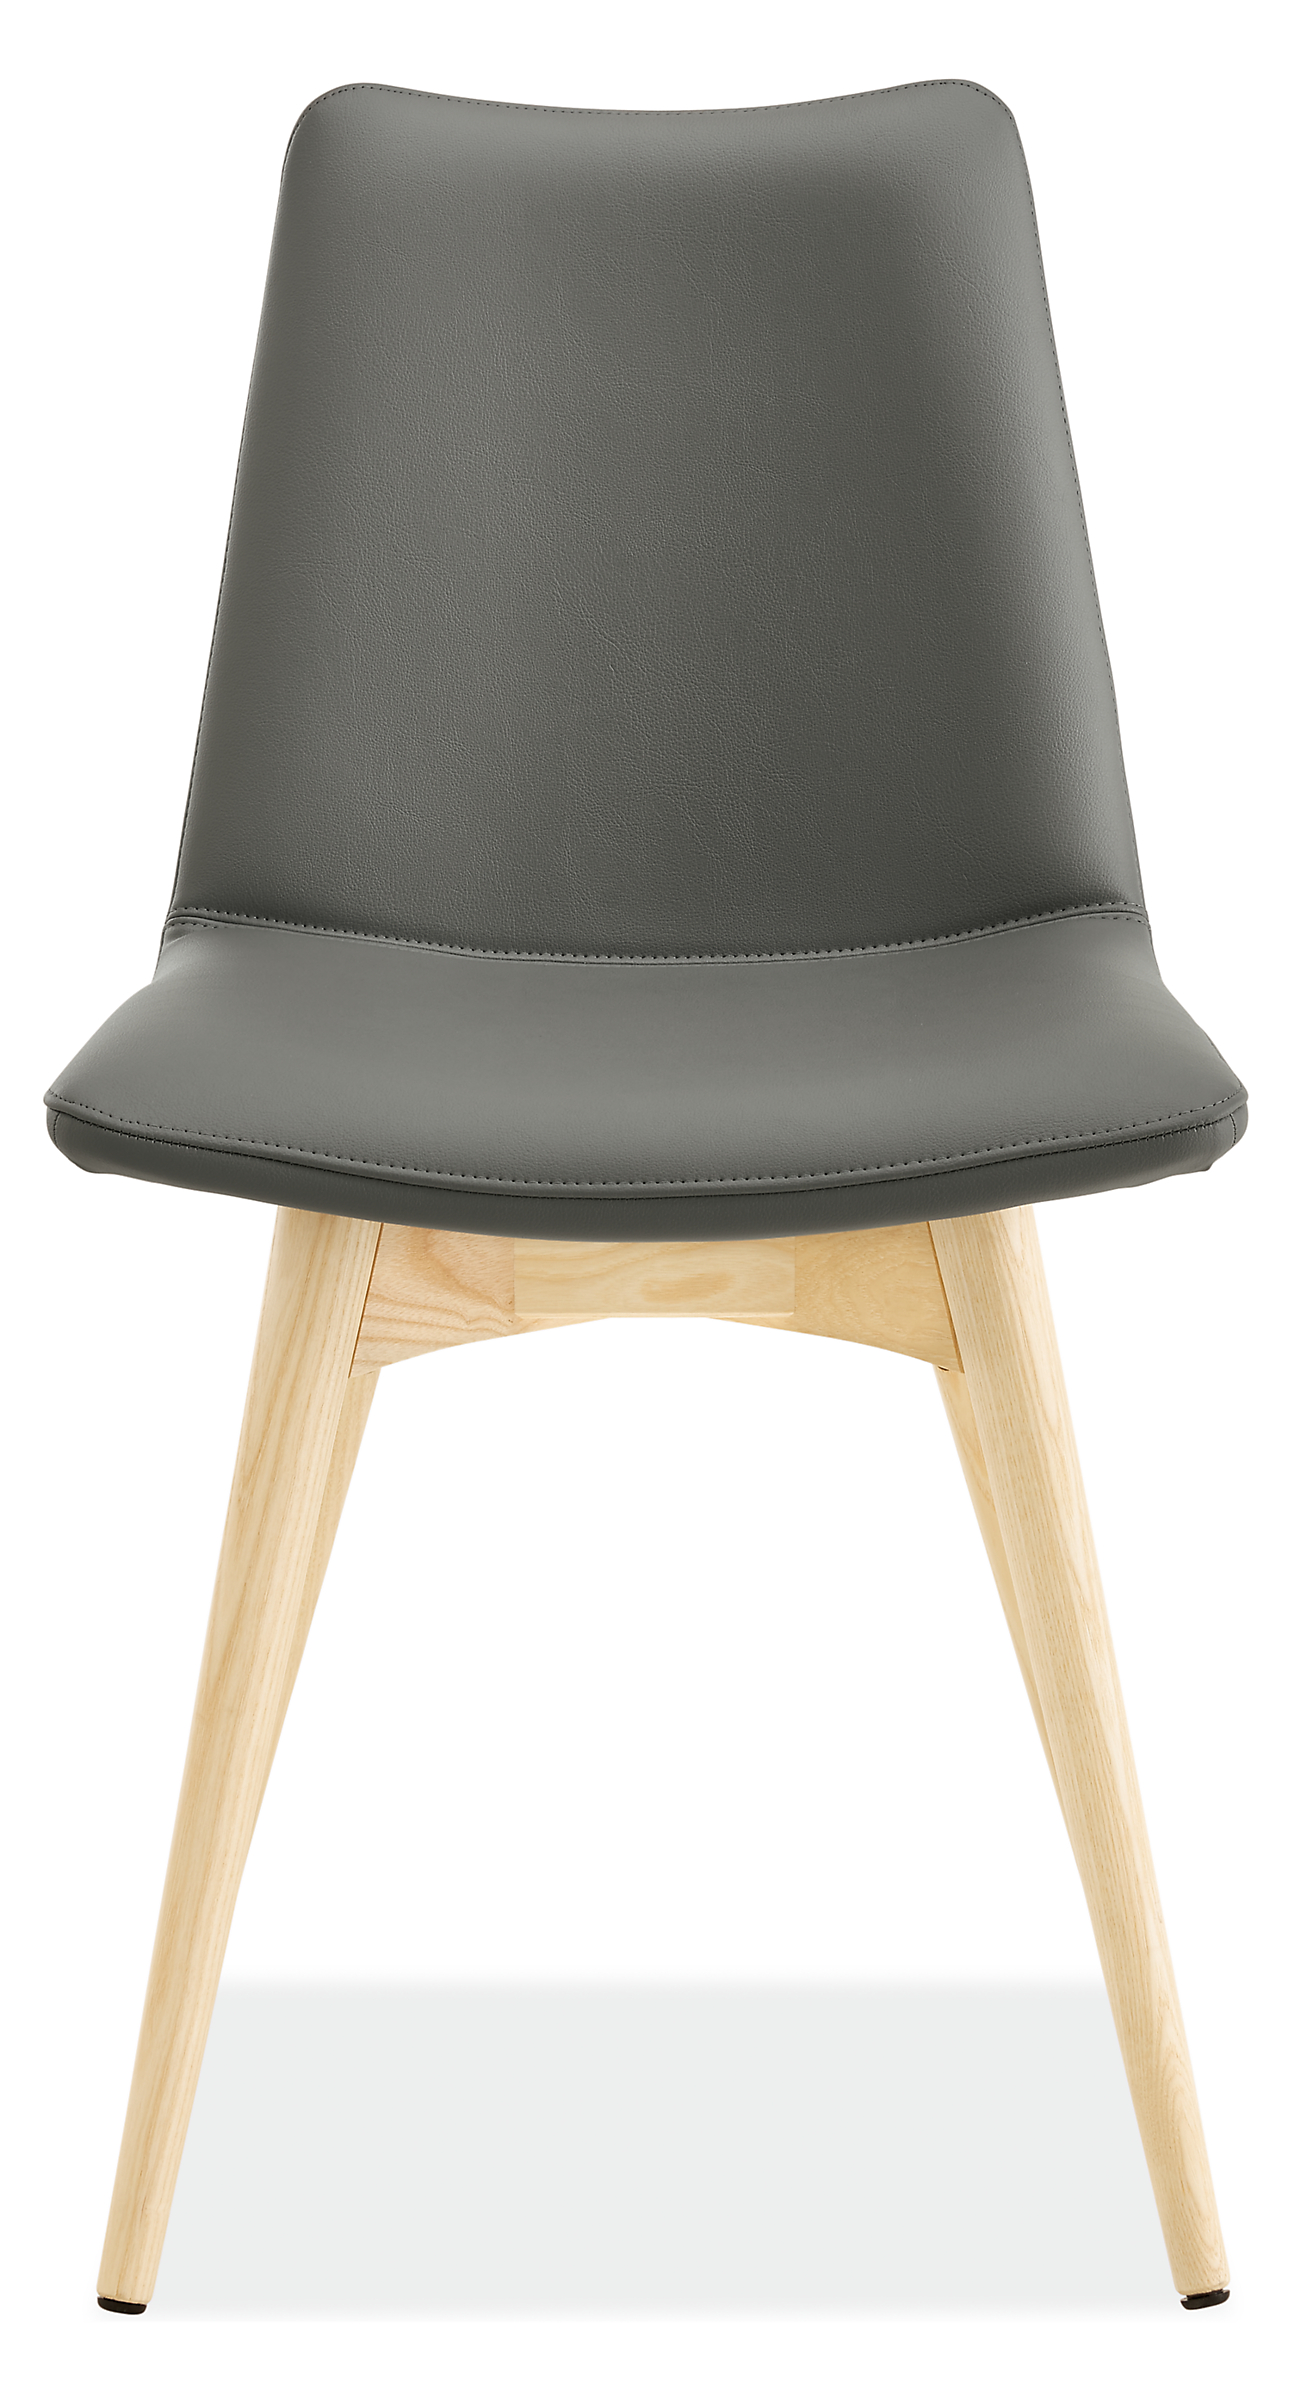 Front view of Arthur Dining Chair in Synthetic Leather with Wood Legs.